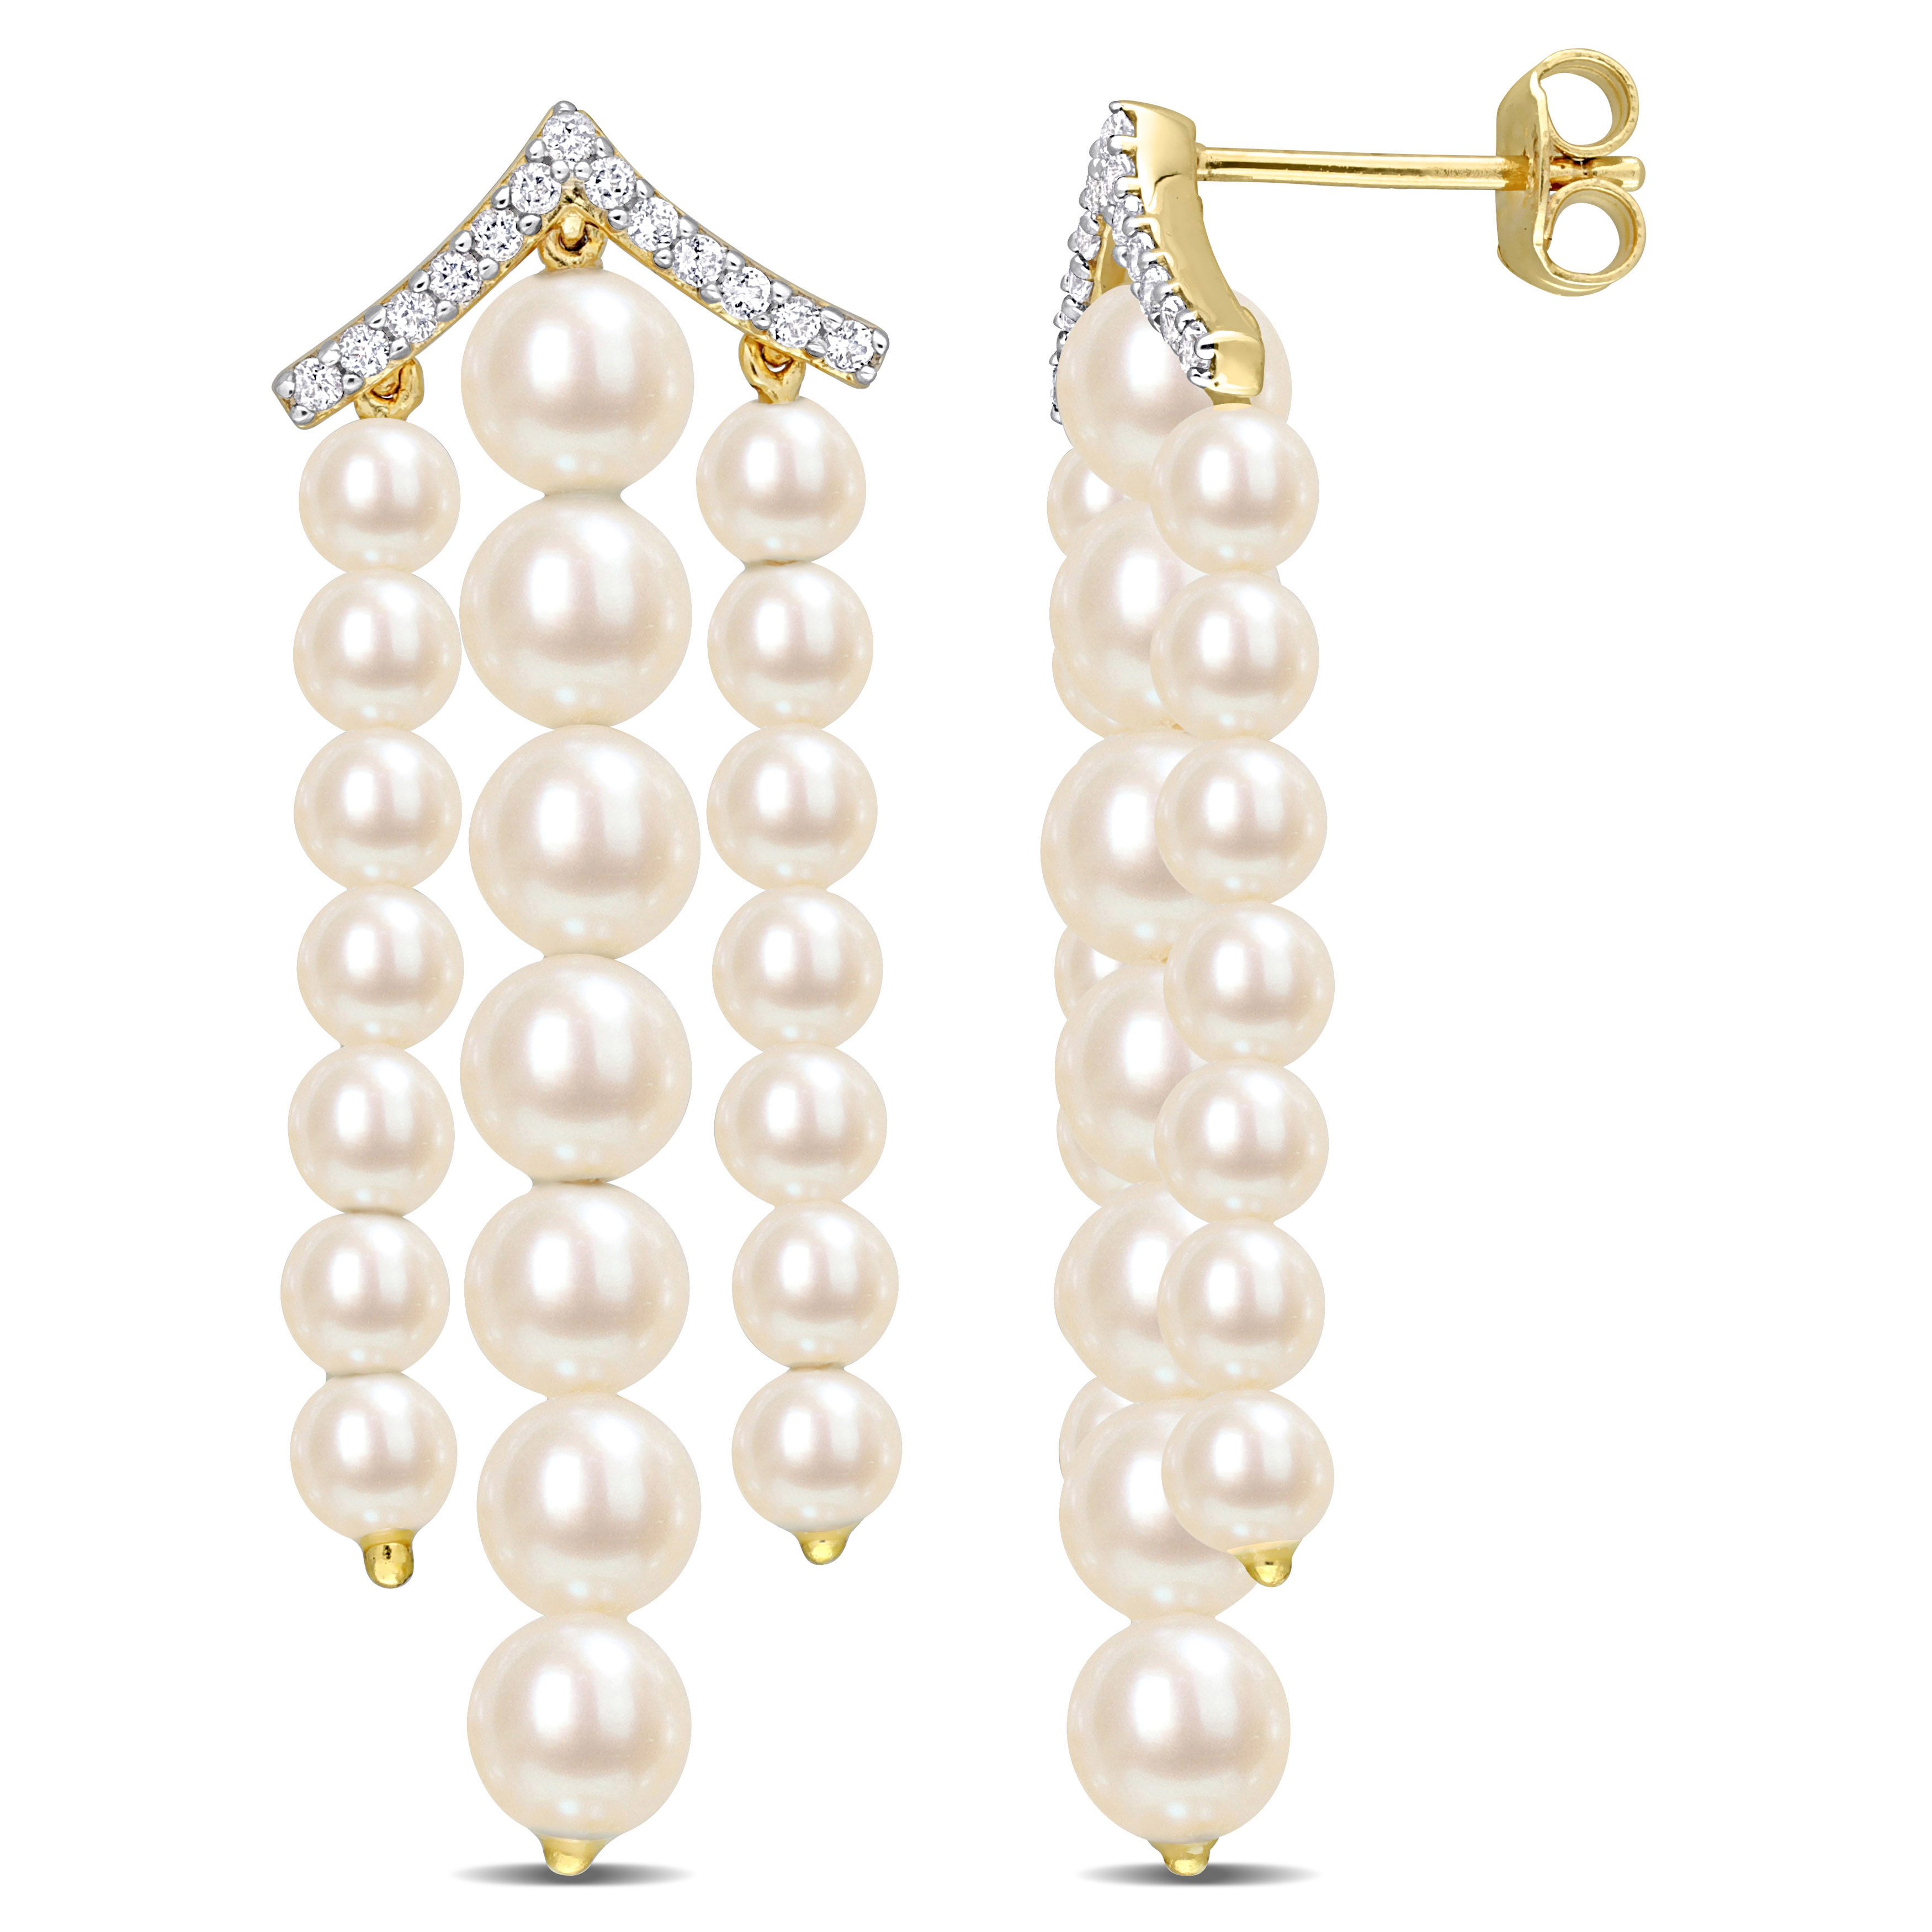 Freshwater Cultured Pearl and 1/4 CT TGW White Topaz Chandelier Earrings in Yellow Gold Plated Sterling Silver